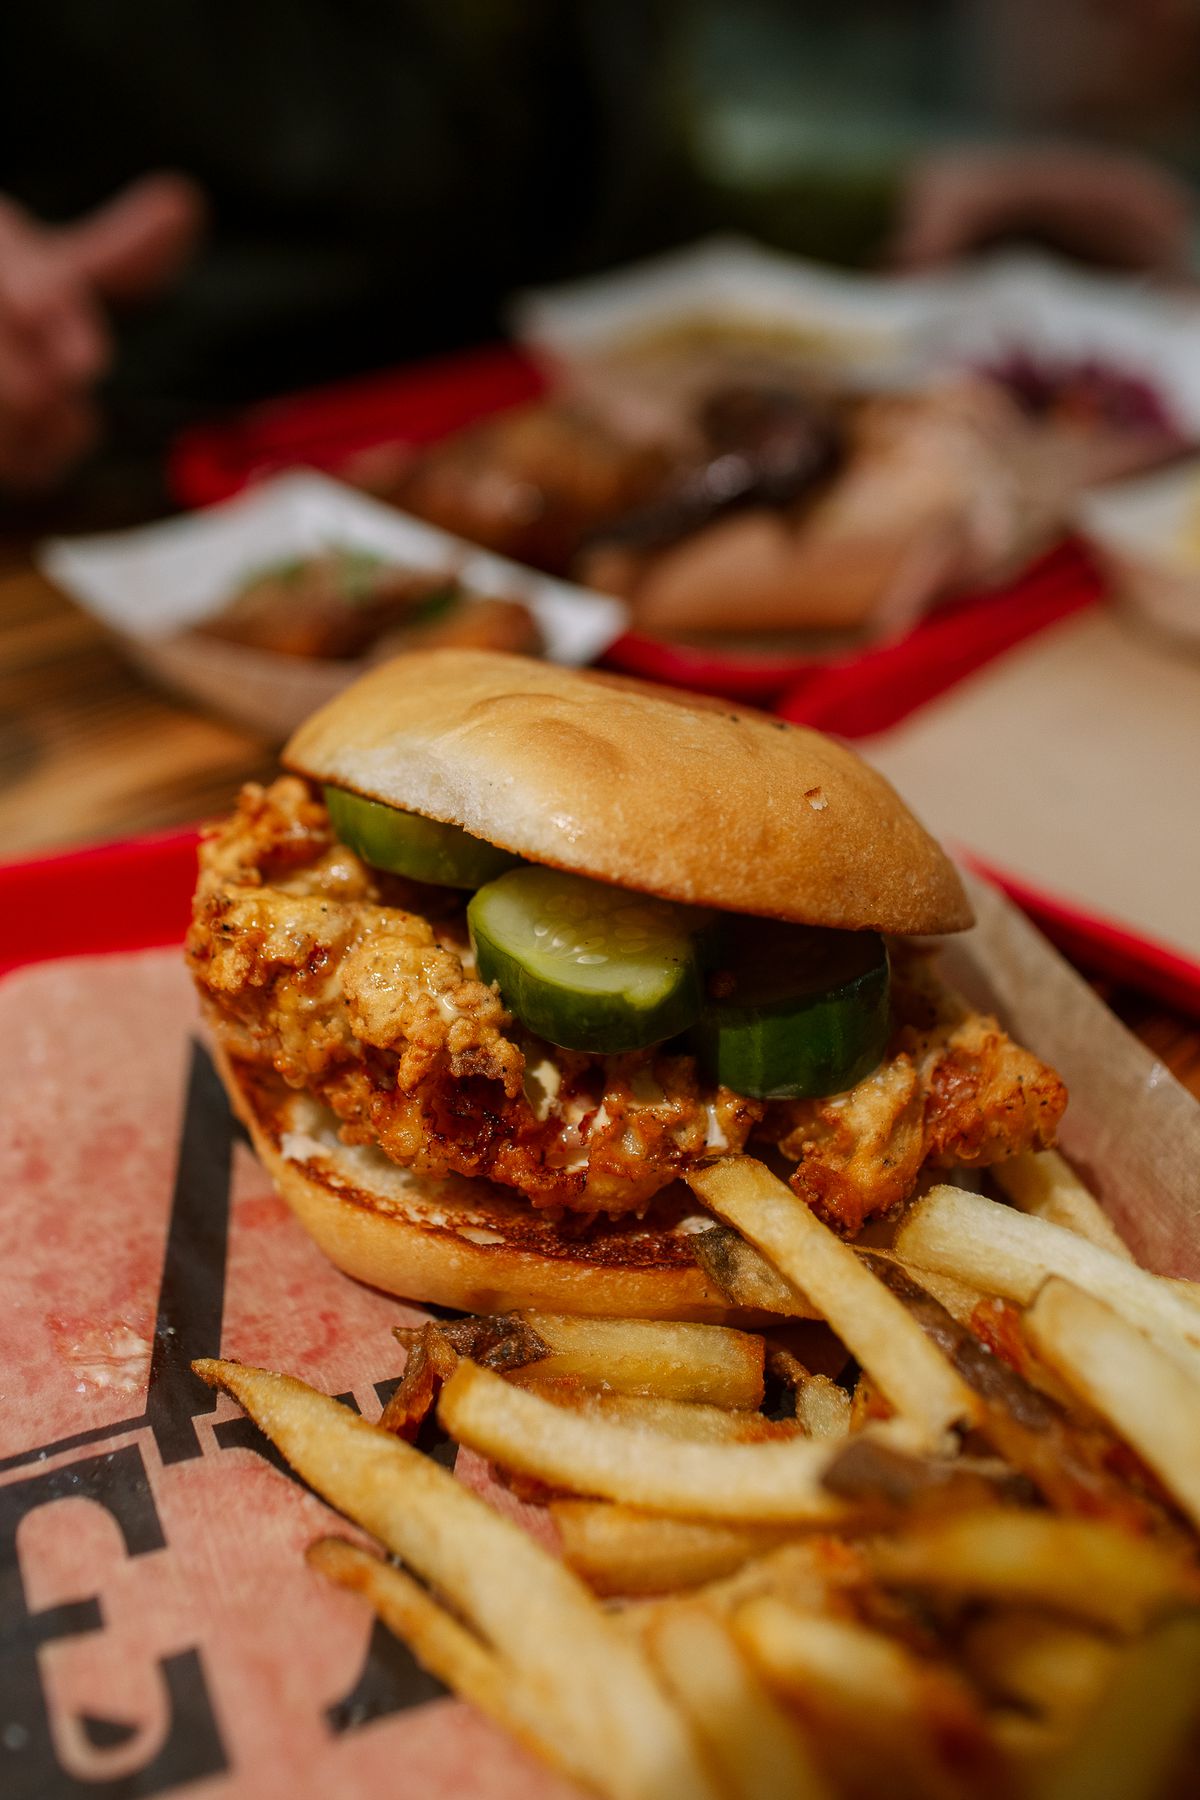 A fried chicken sandwich with homemade pickles is served on a tray with fries.